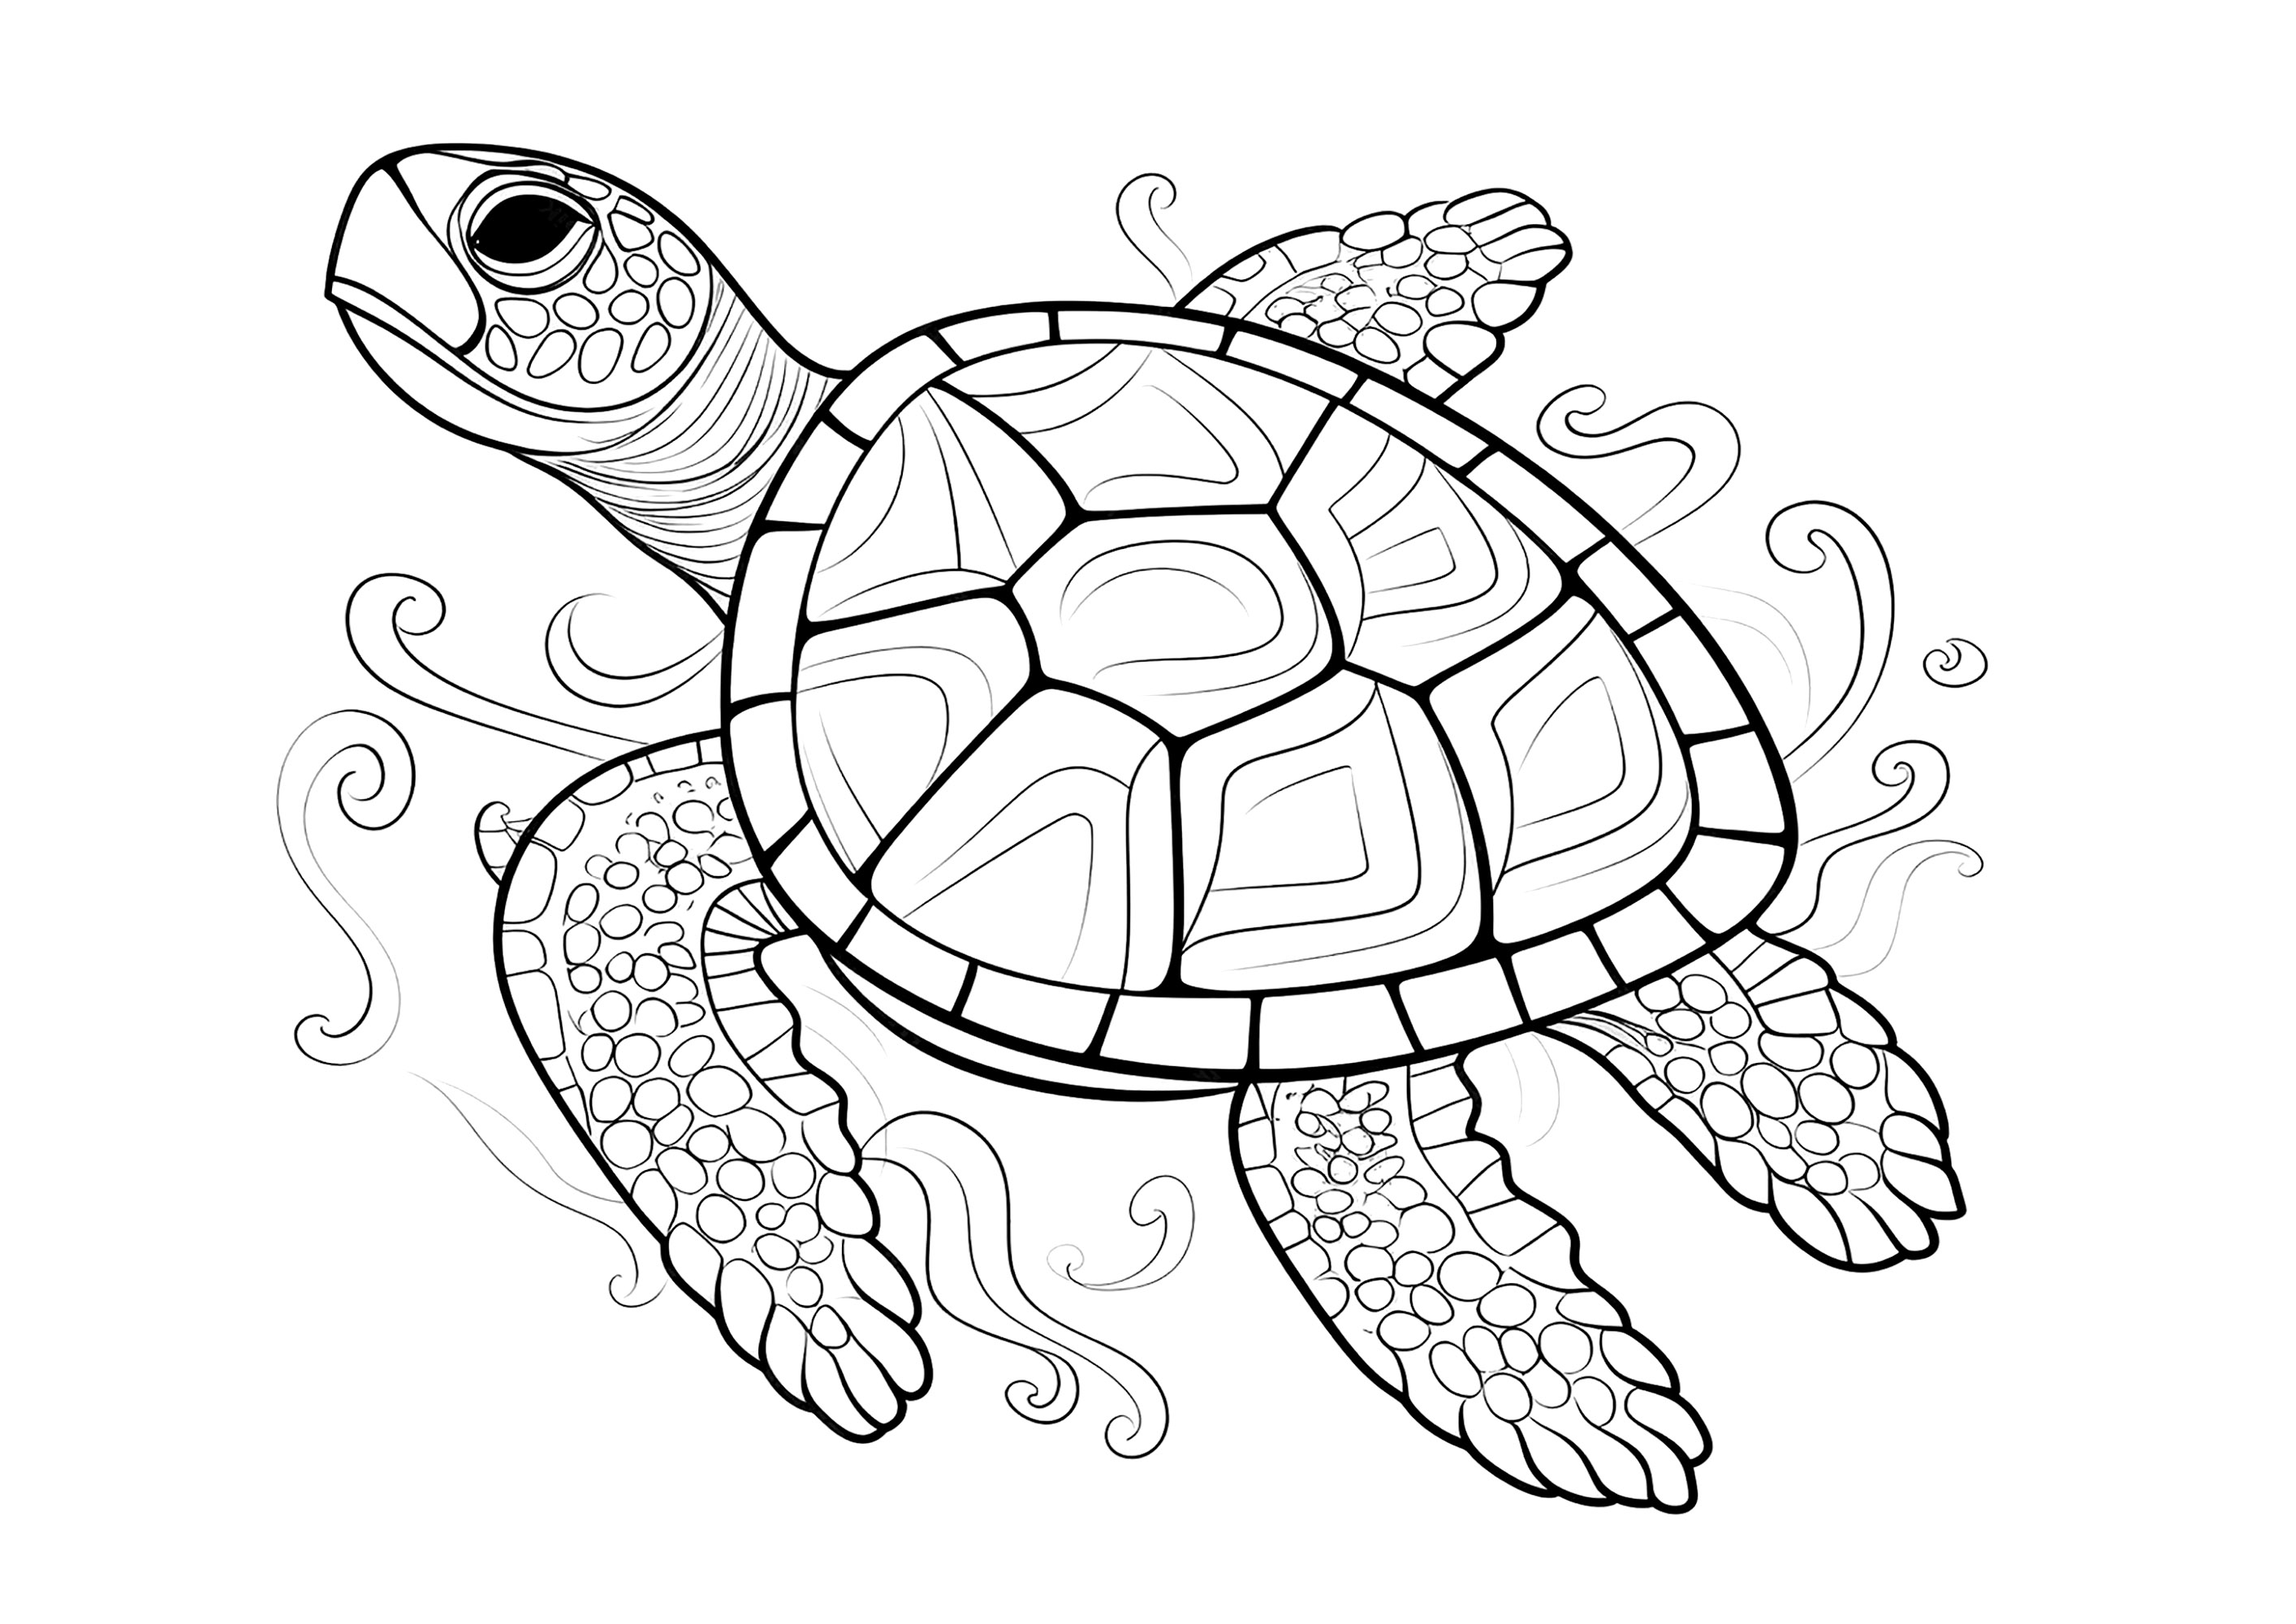 Beautiful turtle to color. Colour each scale with different shades of the same color, or different colors.